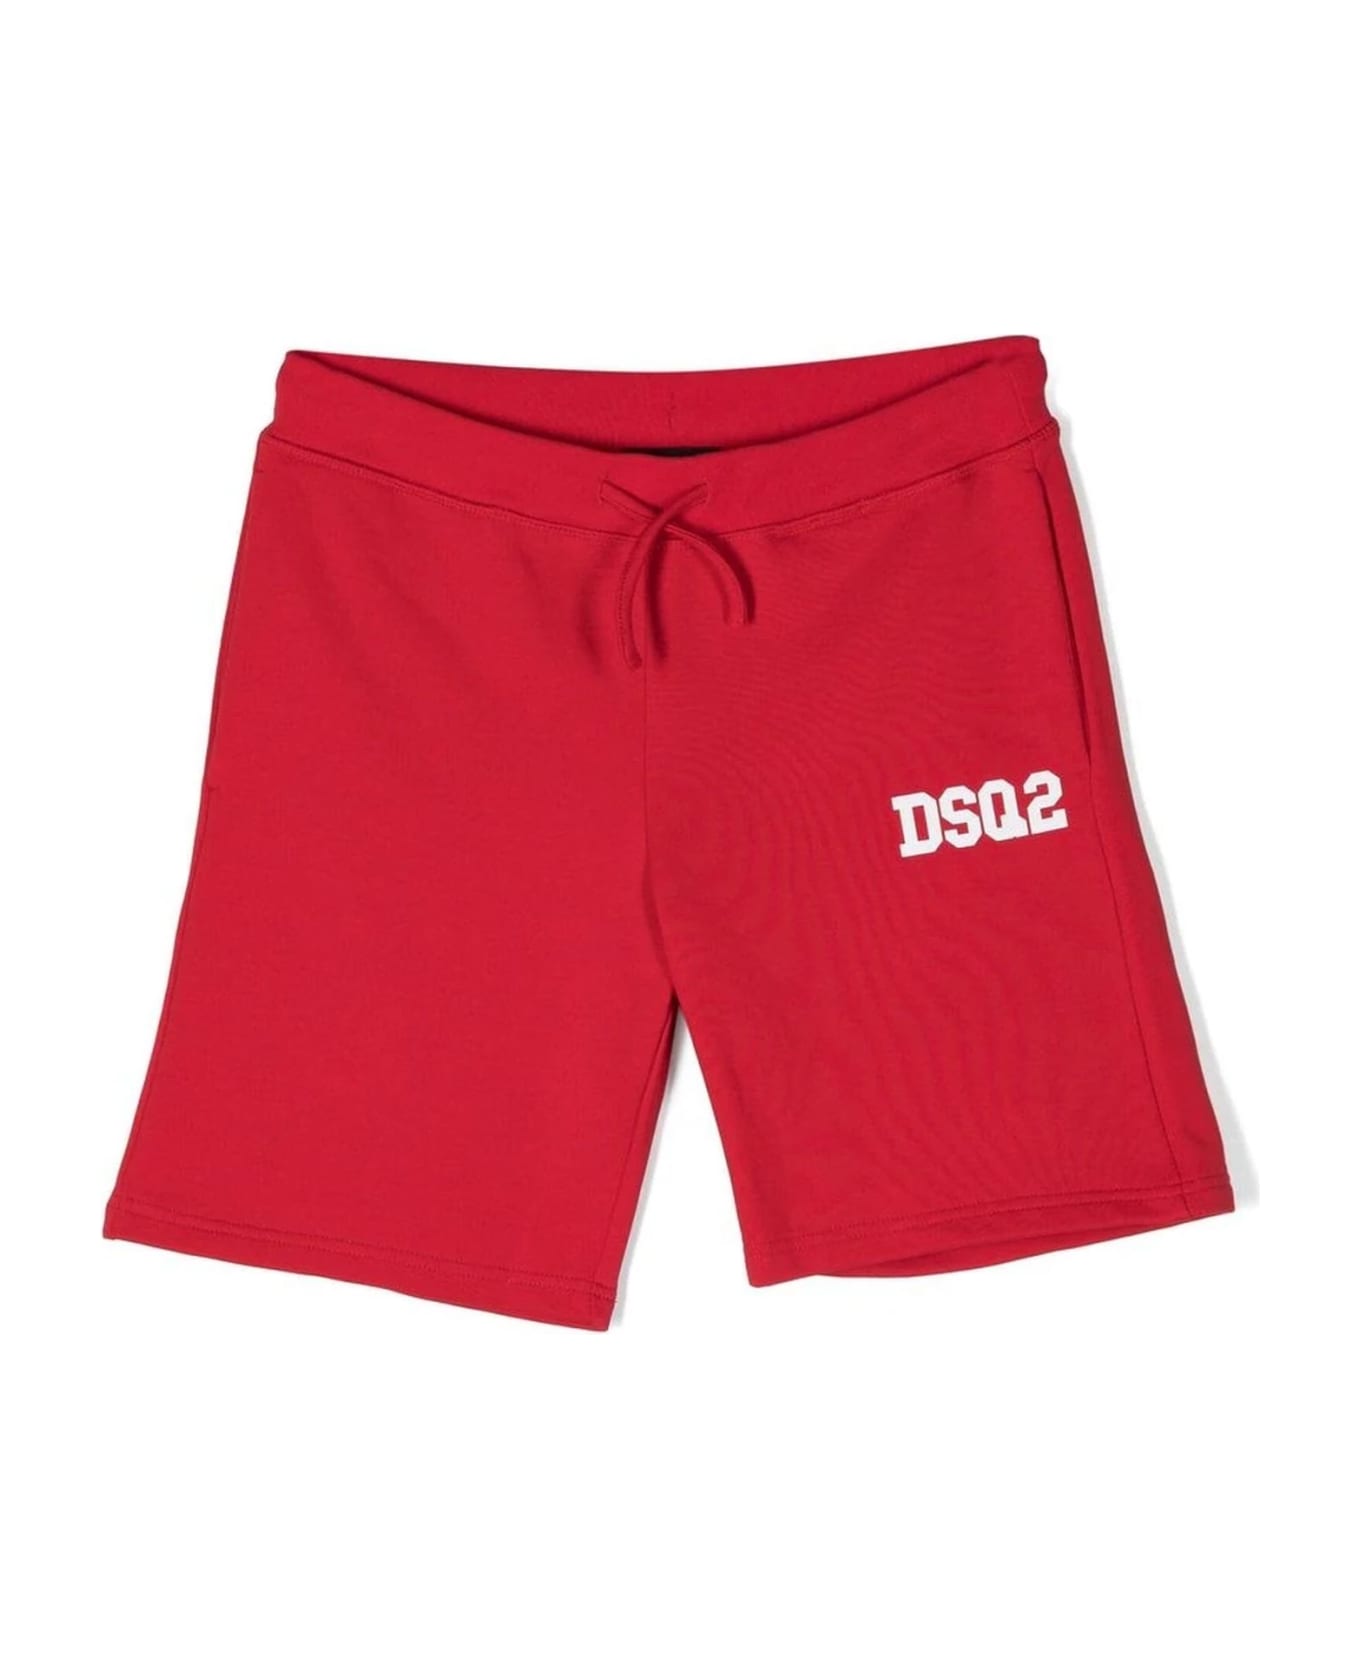 Dsquared2 Shorts Red - Red ボトムス